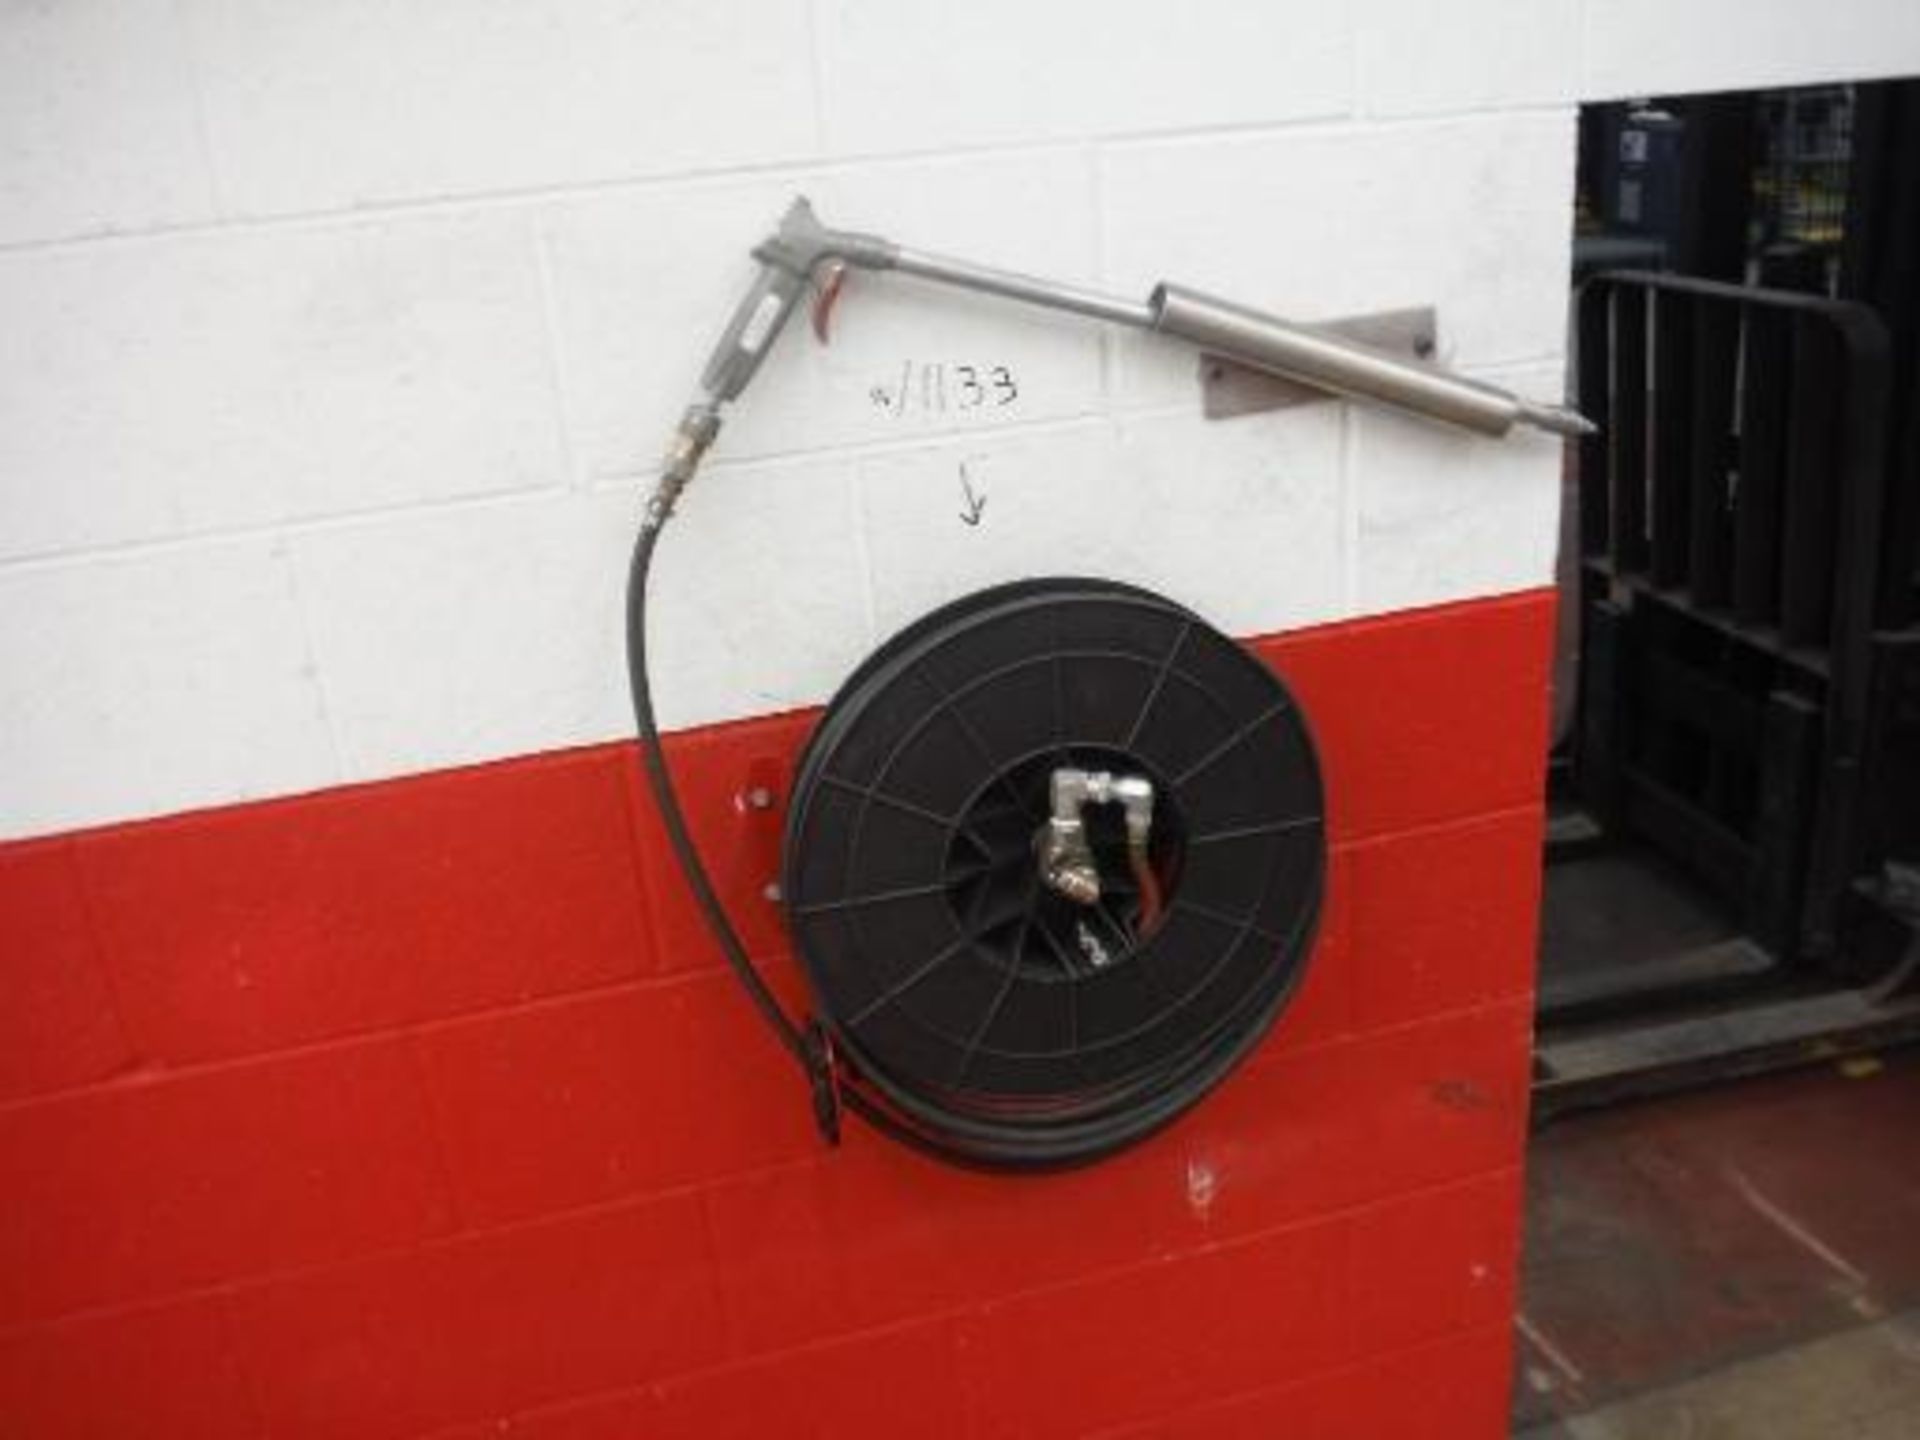 Shop Vac, wall mount rechargeable flashlight, 18 in diameter hose reel. Located in Marion, Ohio - Image 2 of 2